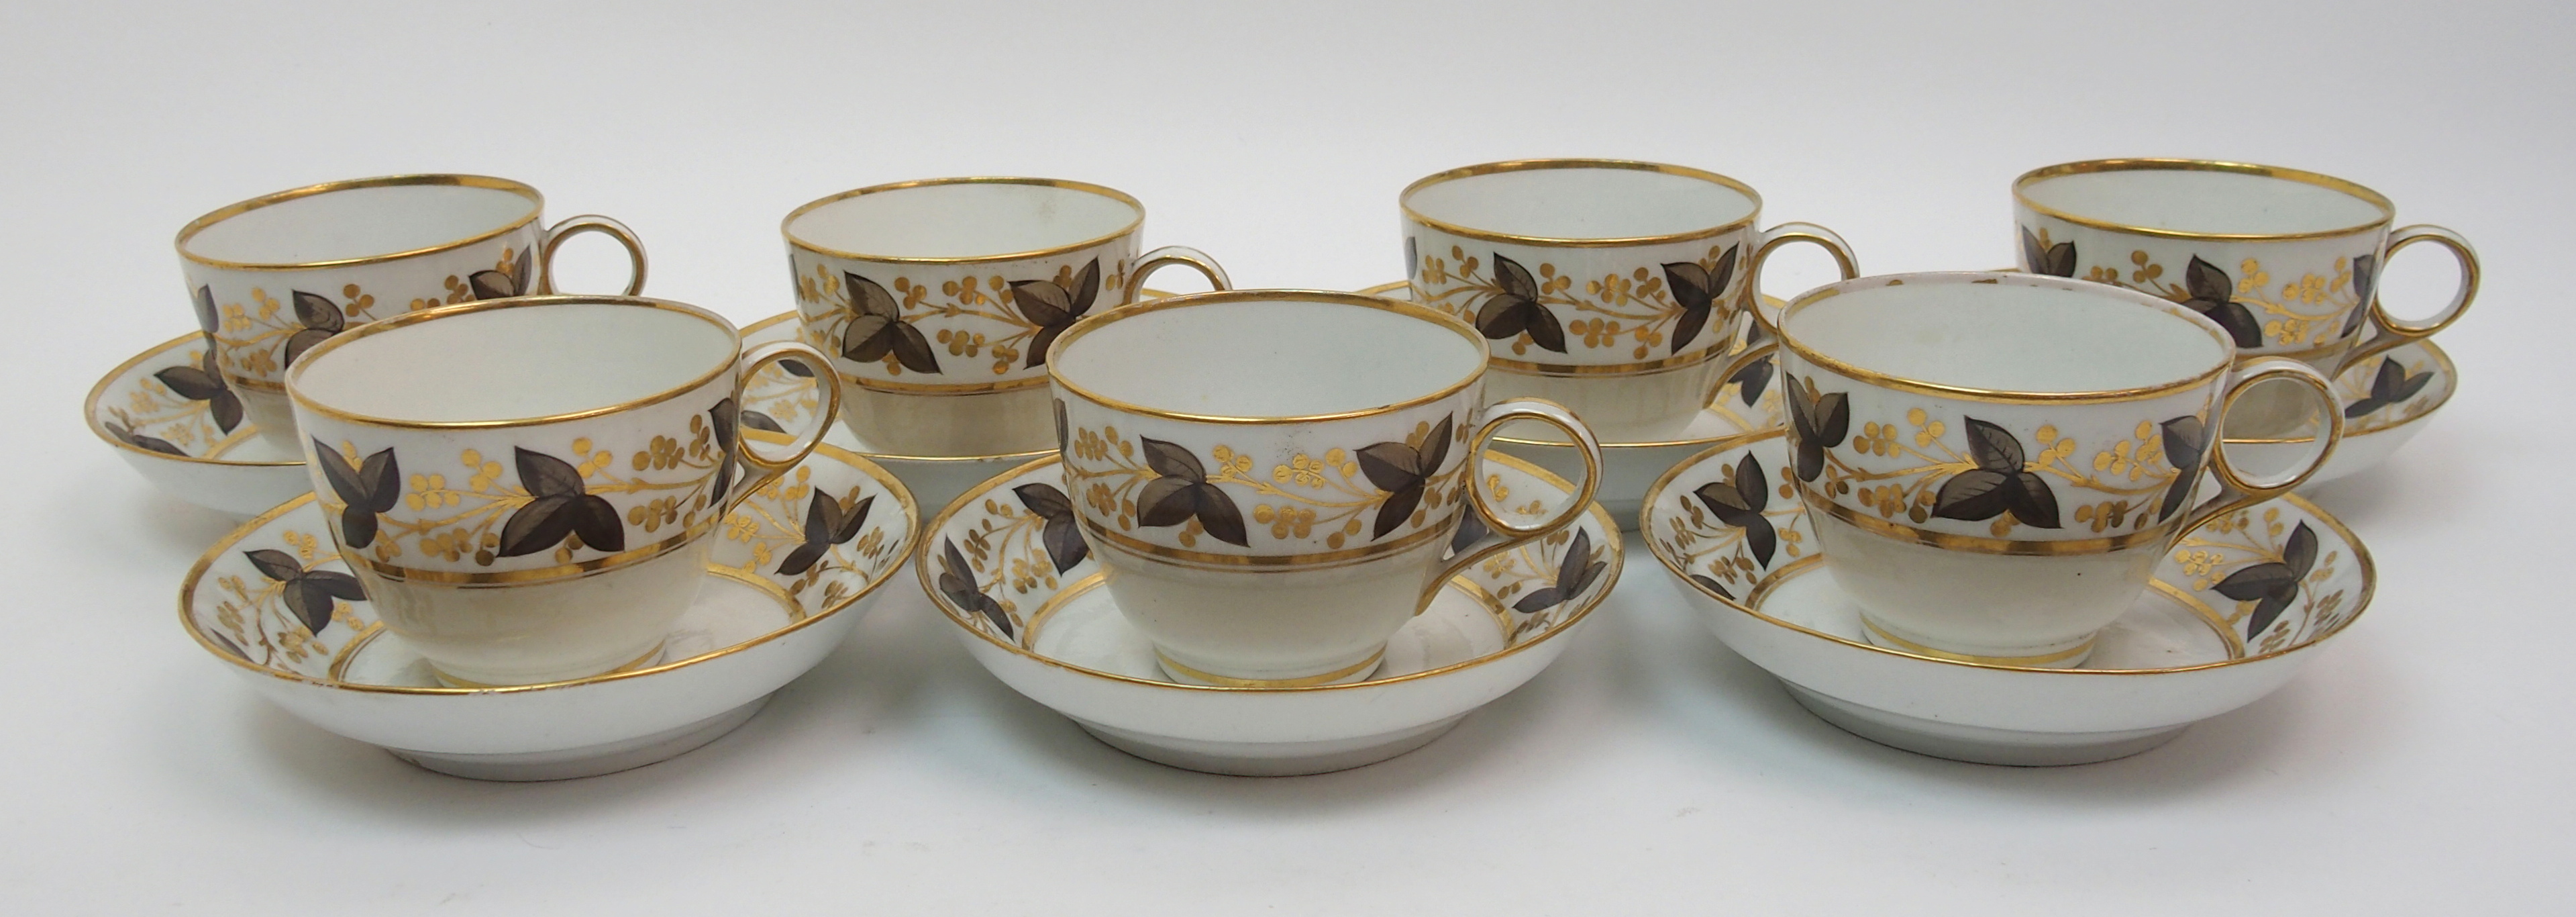 An early 19th Century Chamberlains Worcester porcelain part tea and coffee service painted in - Image 9 of 10